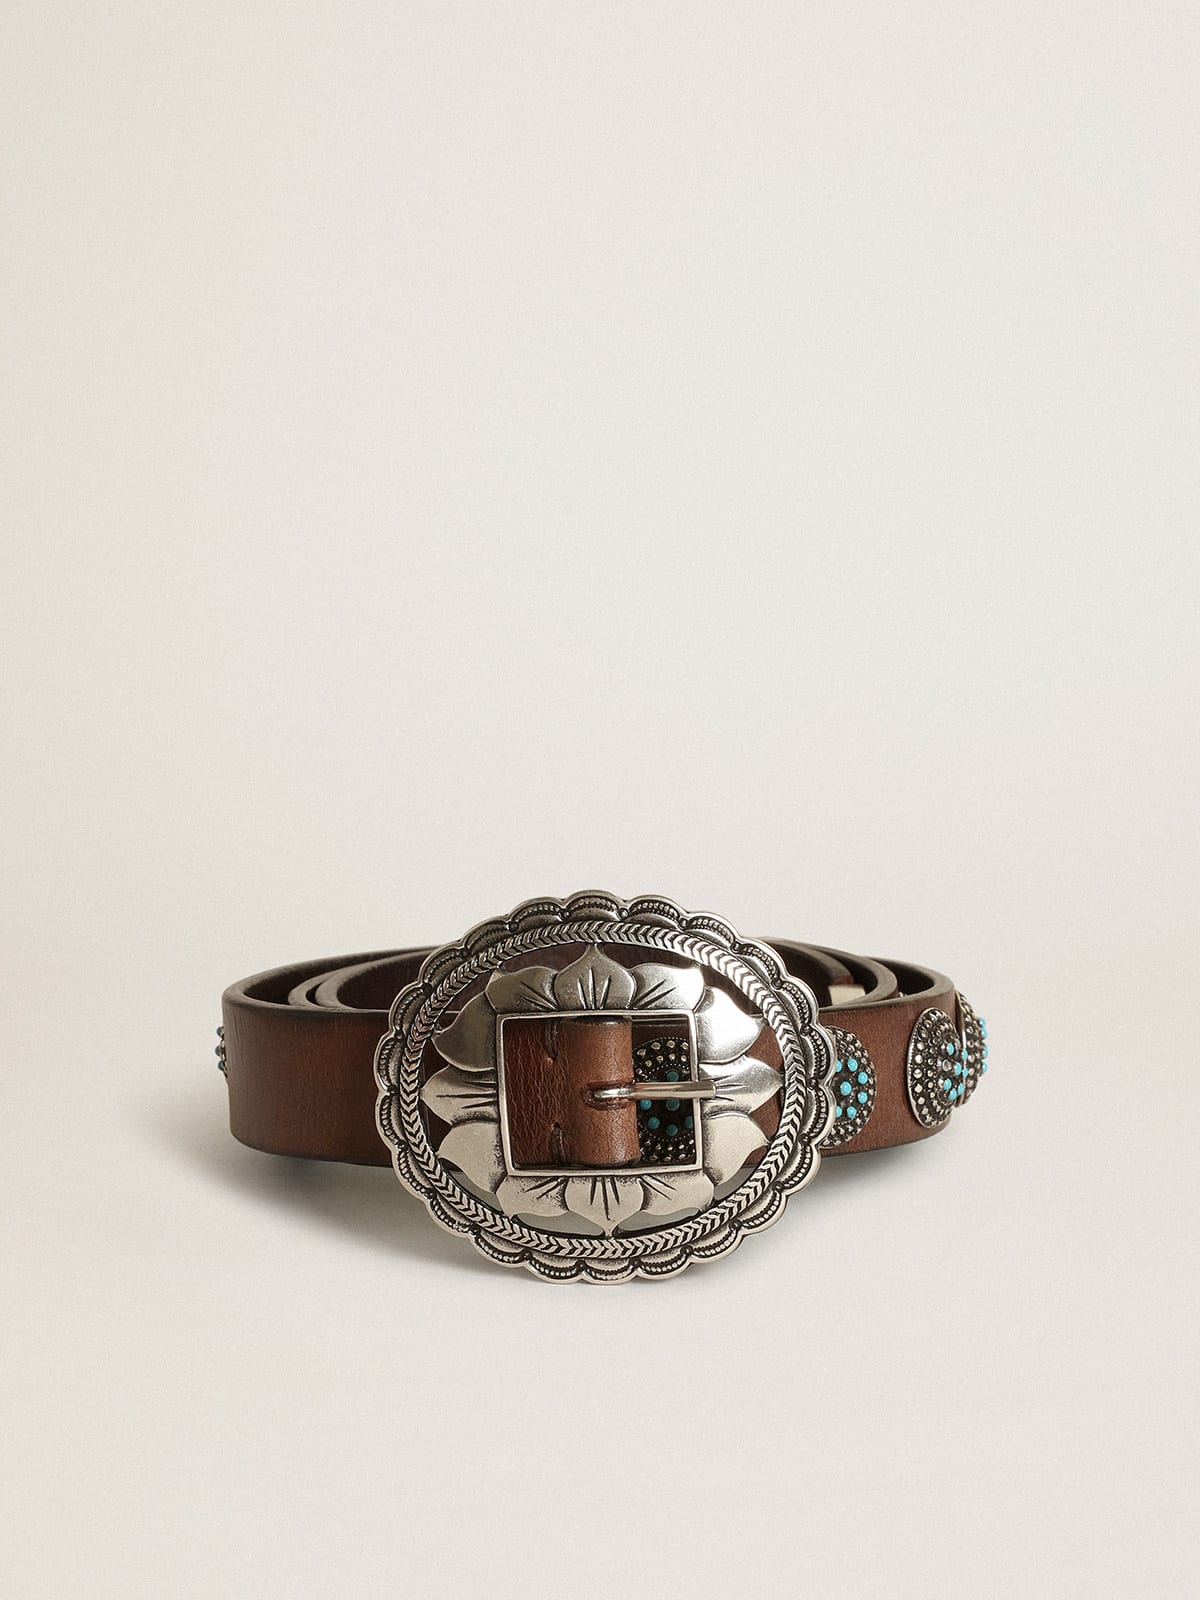 Golden Goose - Sunflowers belt in dark brown leather with vintage silver colored studs in 